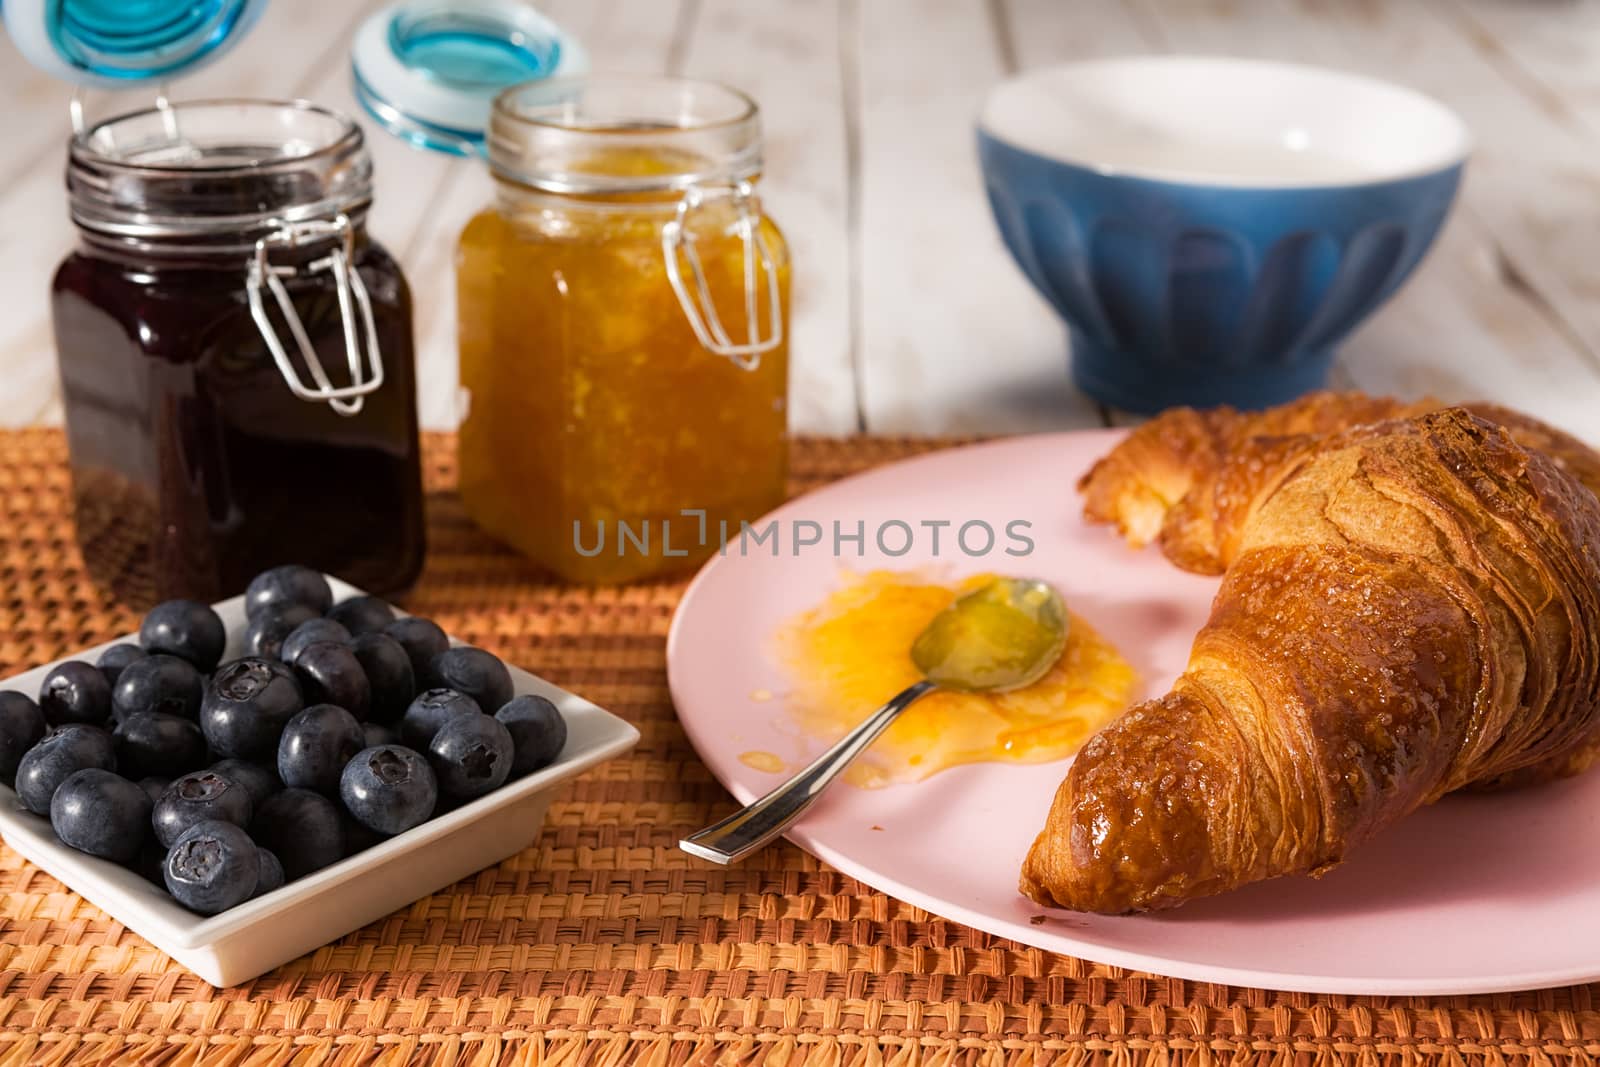 Breakfast with croissant, blueberries, milk, orange and blueberry jam over a tablecloth